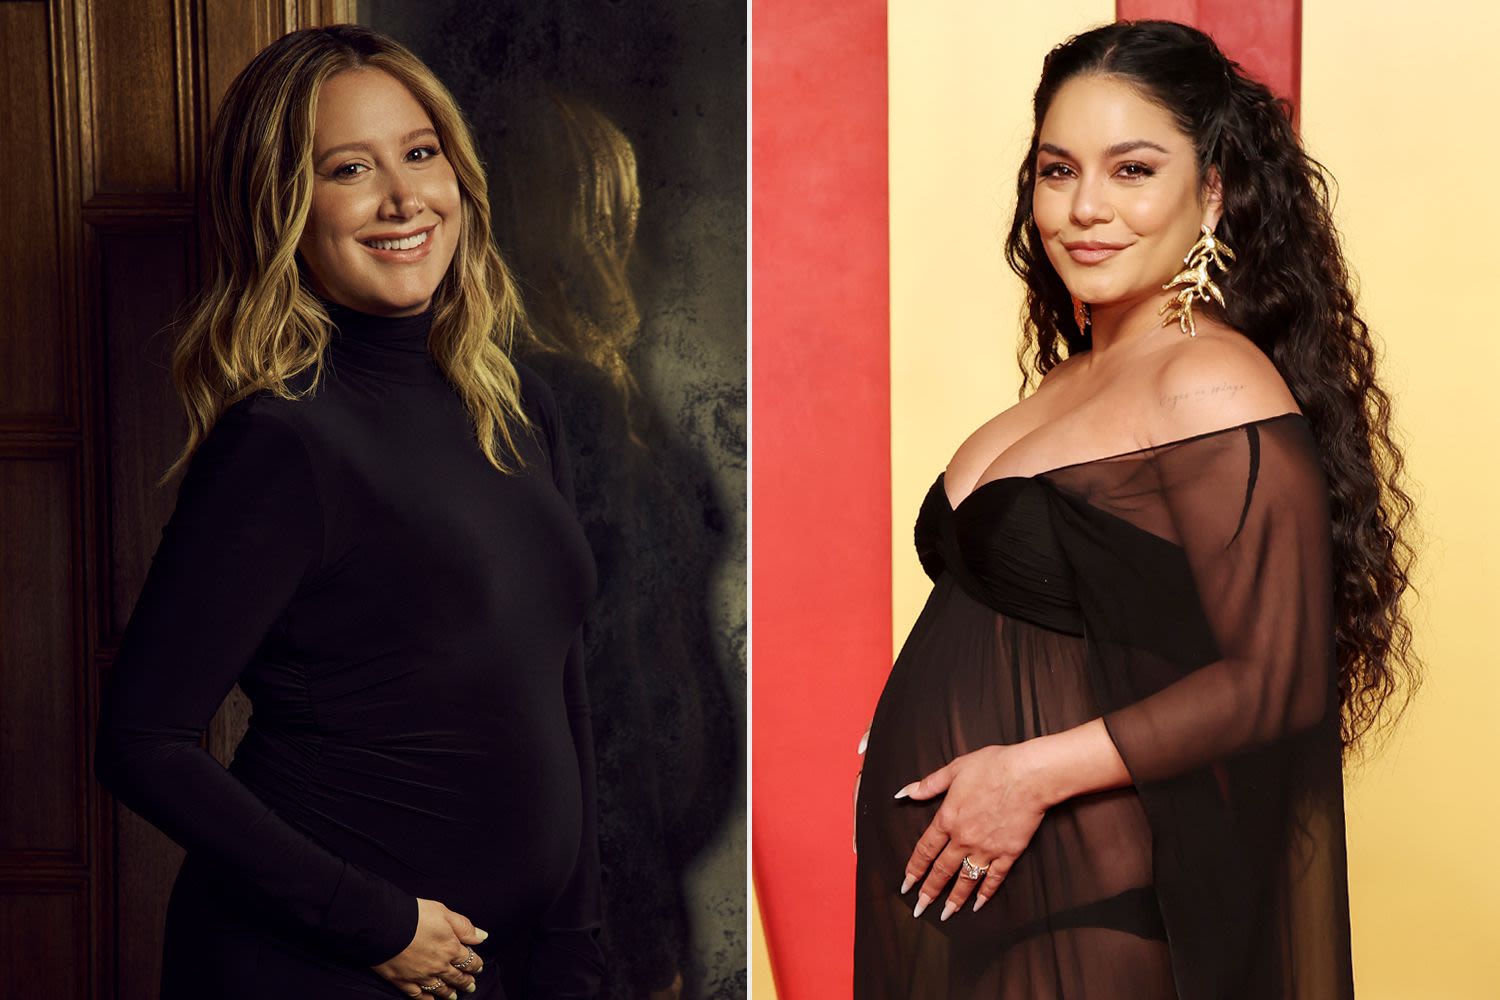 Pregnant Ashley Tisdale Says It’s ‘Very Cool’ Vanessa Hudgens Is Expecting Too: 'So Excited'